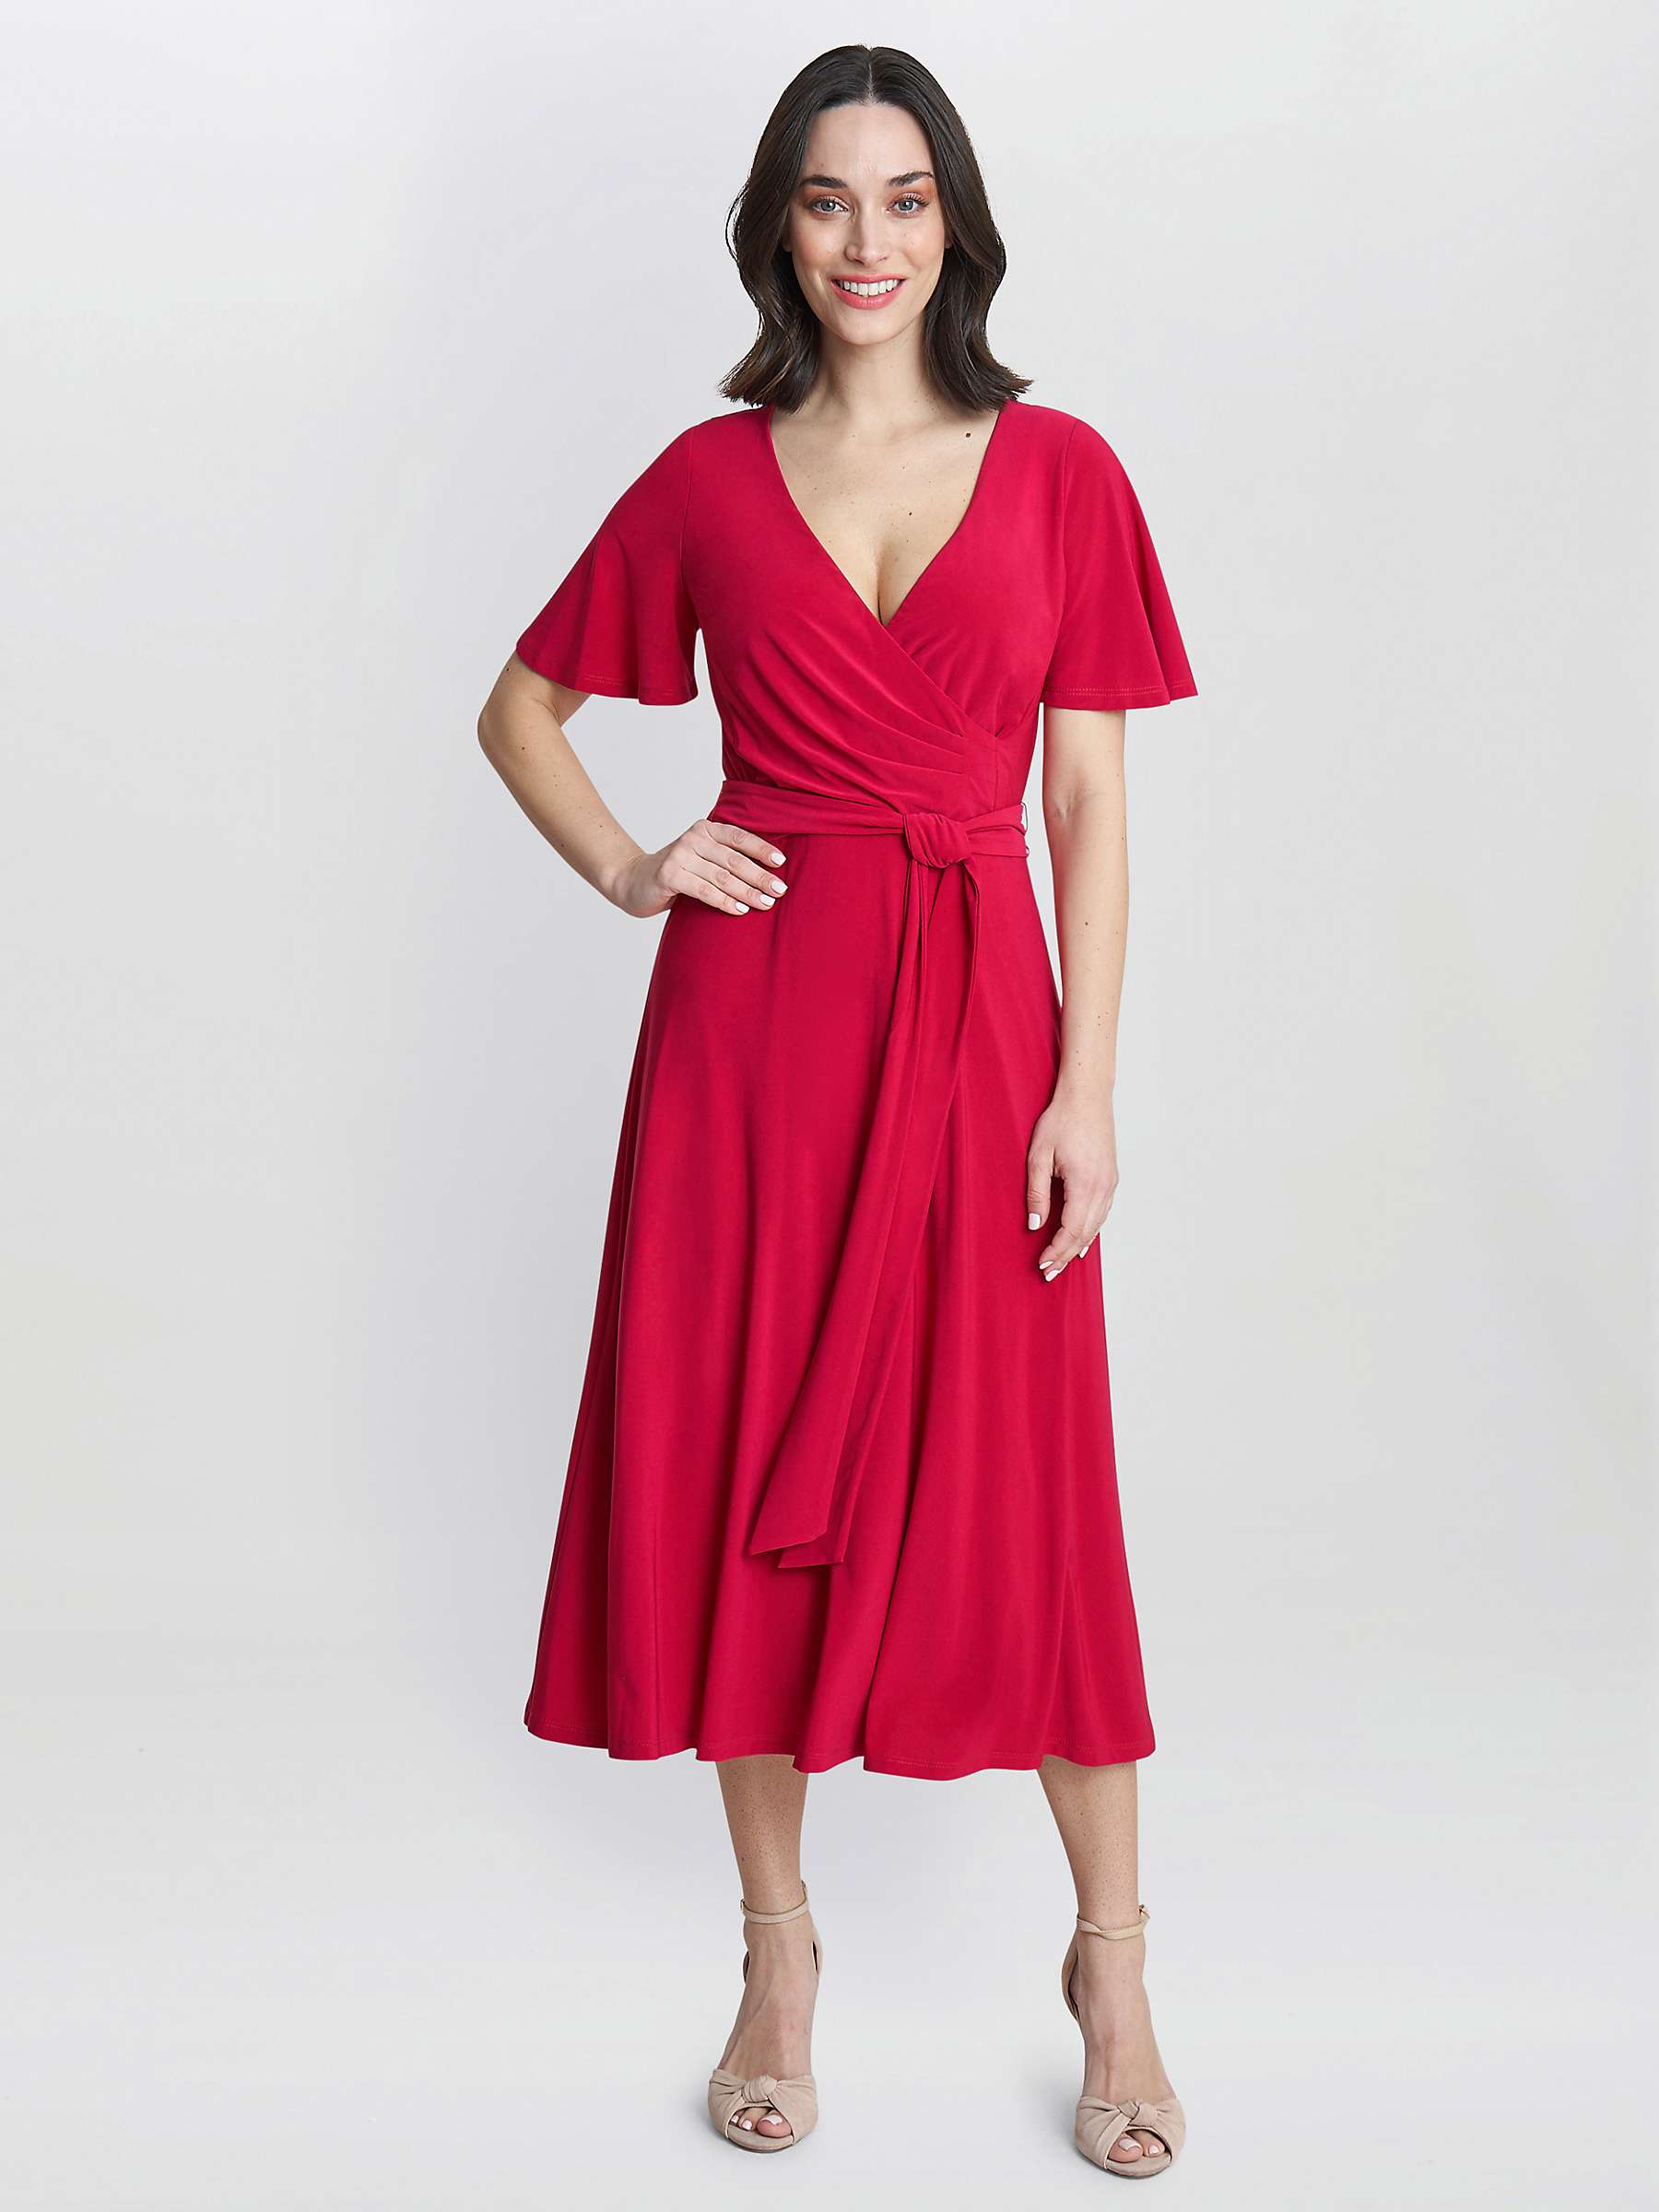 Buy Gina Bacconi Donna Wrap Effect Jersey Dress Online at johnlewis.com